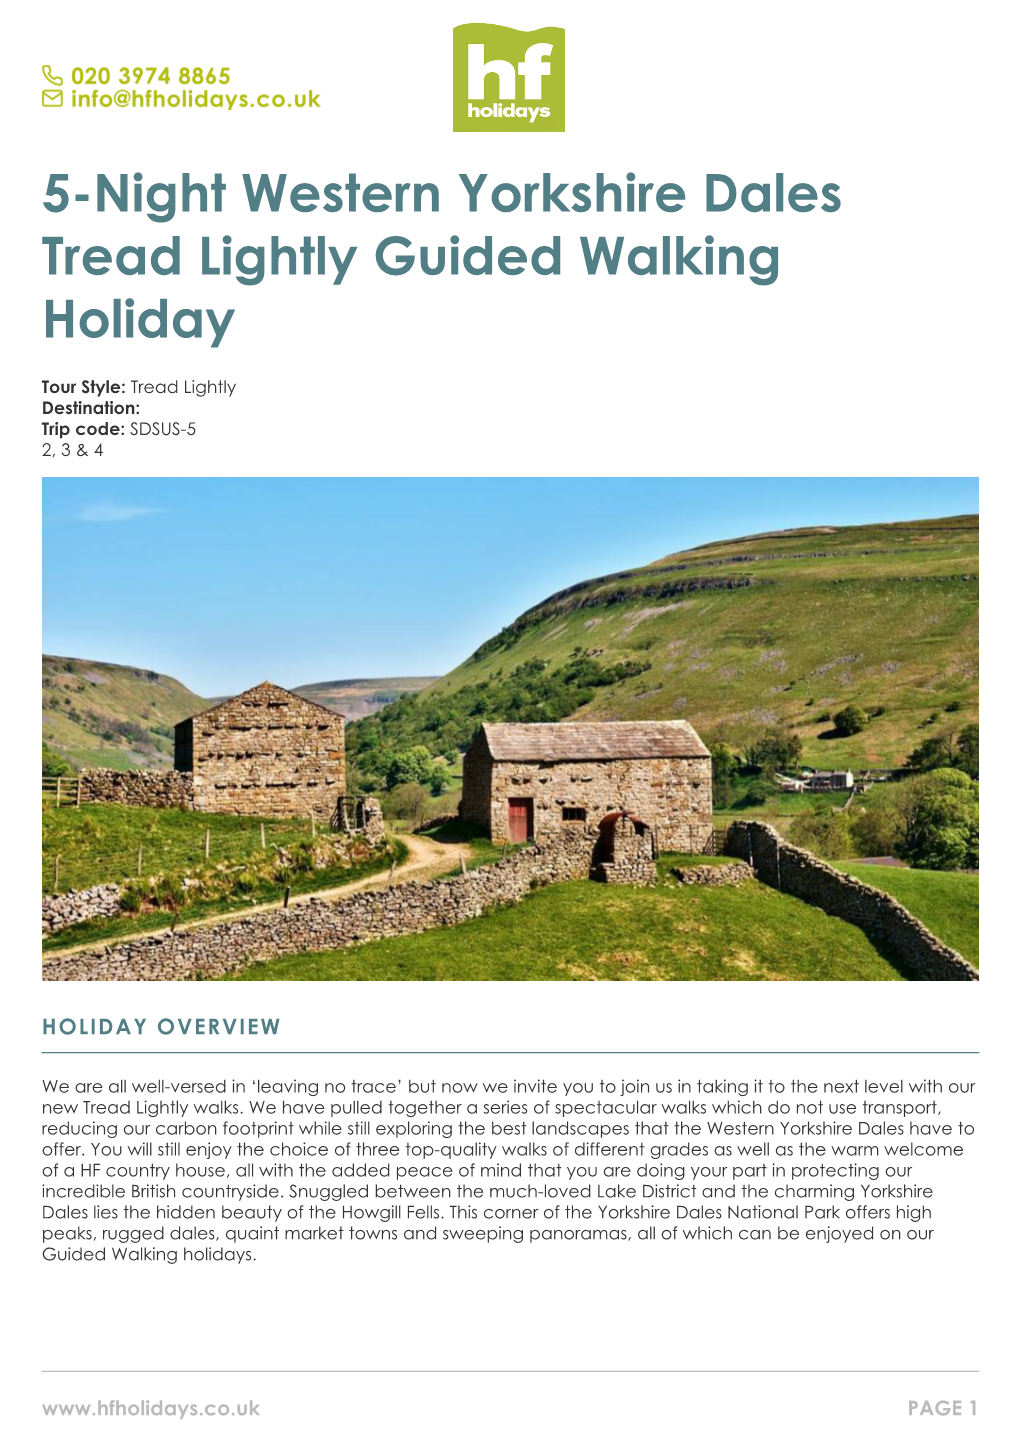 5-Night Western Yorkshire Dales Tread Lightly Guided Walking Holiday